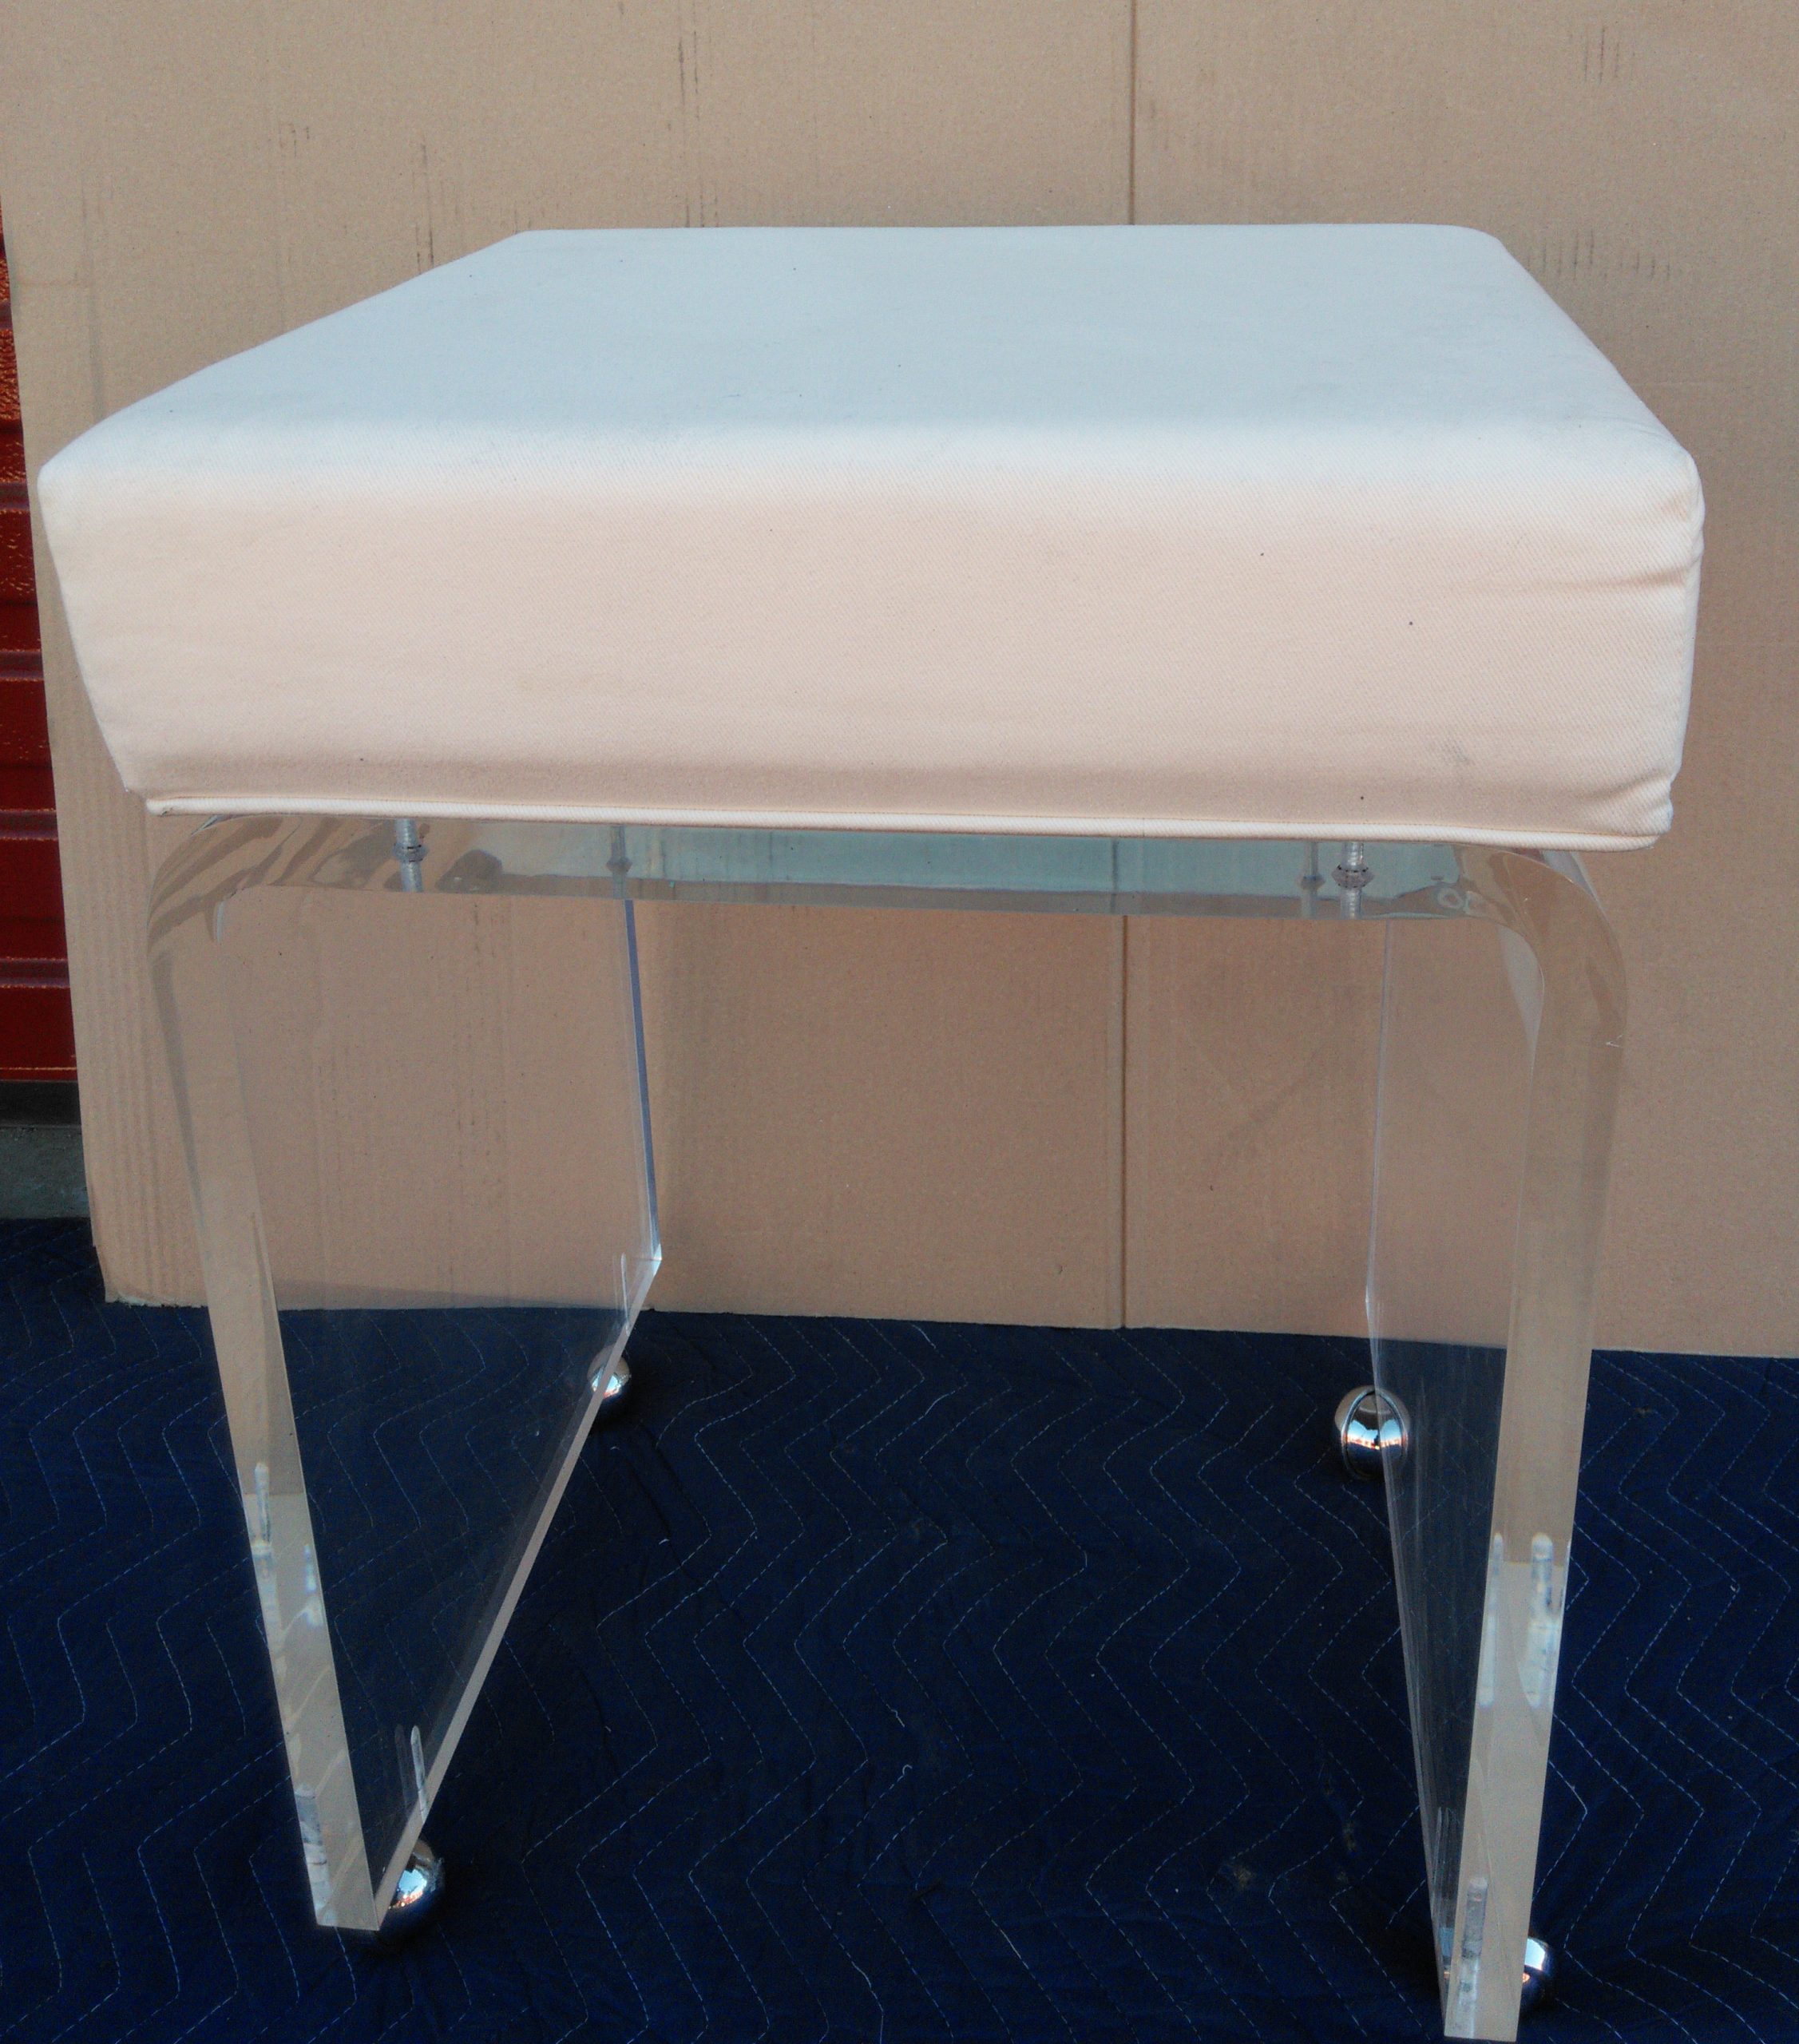 Acrylic Vanity Stool Waterfall Style 1, Vanity Stools With Casters